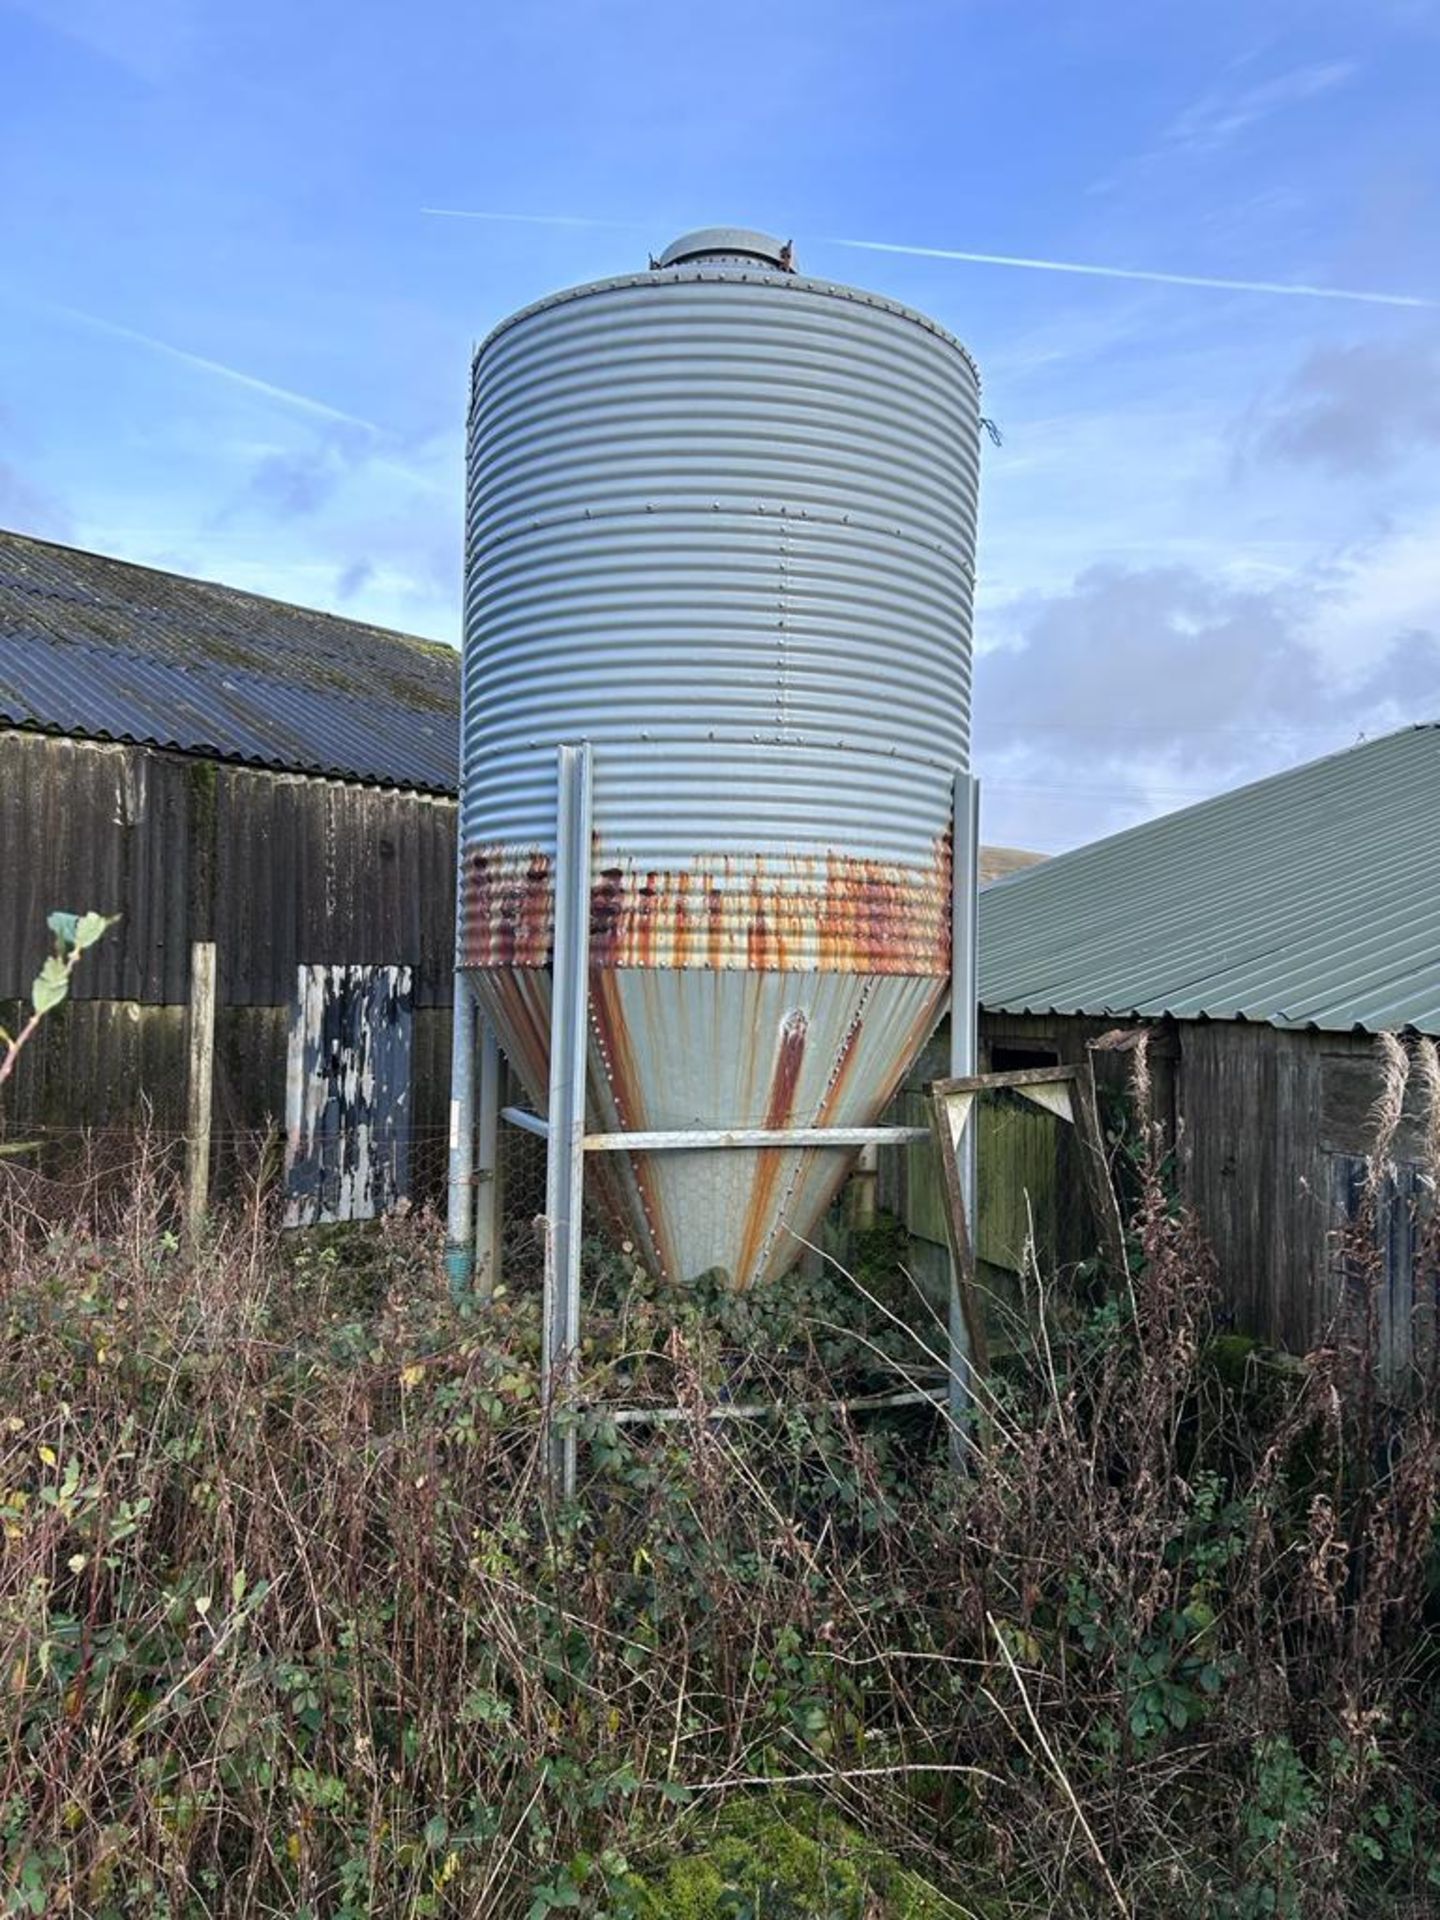 GRAIN SILO NO VAT TO BE COLLECTED FROM OLDHAM OL15 0RA THE VENDOR CAN DELIVER AT A COST - FURTHER - Image 3 of 5